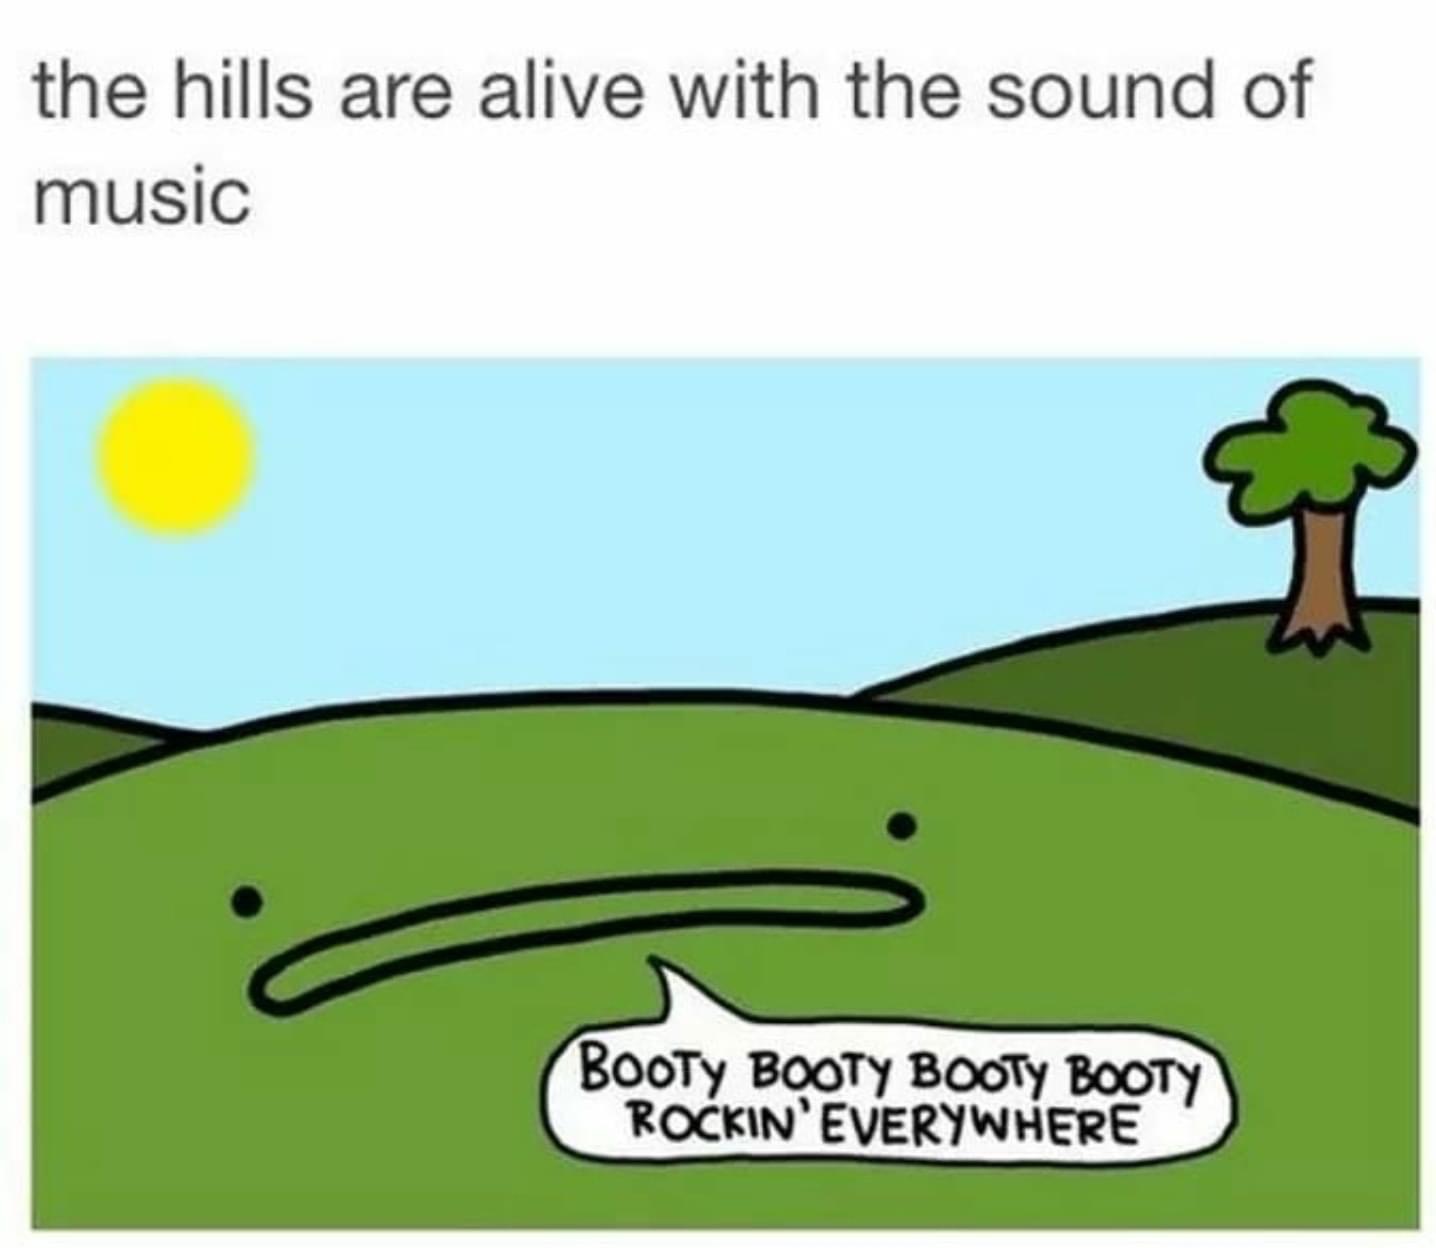 the hills are alive with the sound of music Booty Booty Booty Booty Rockin' Everywhere